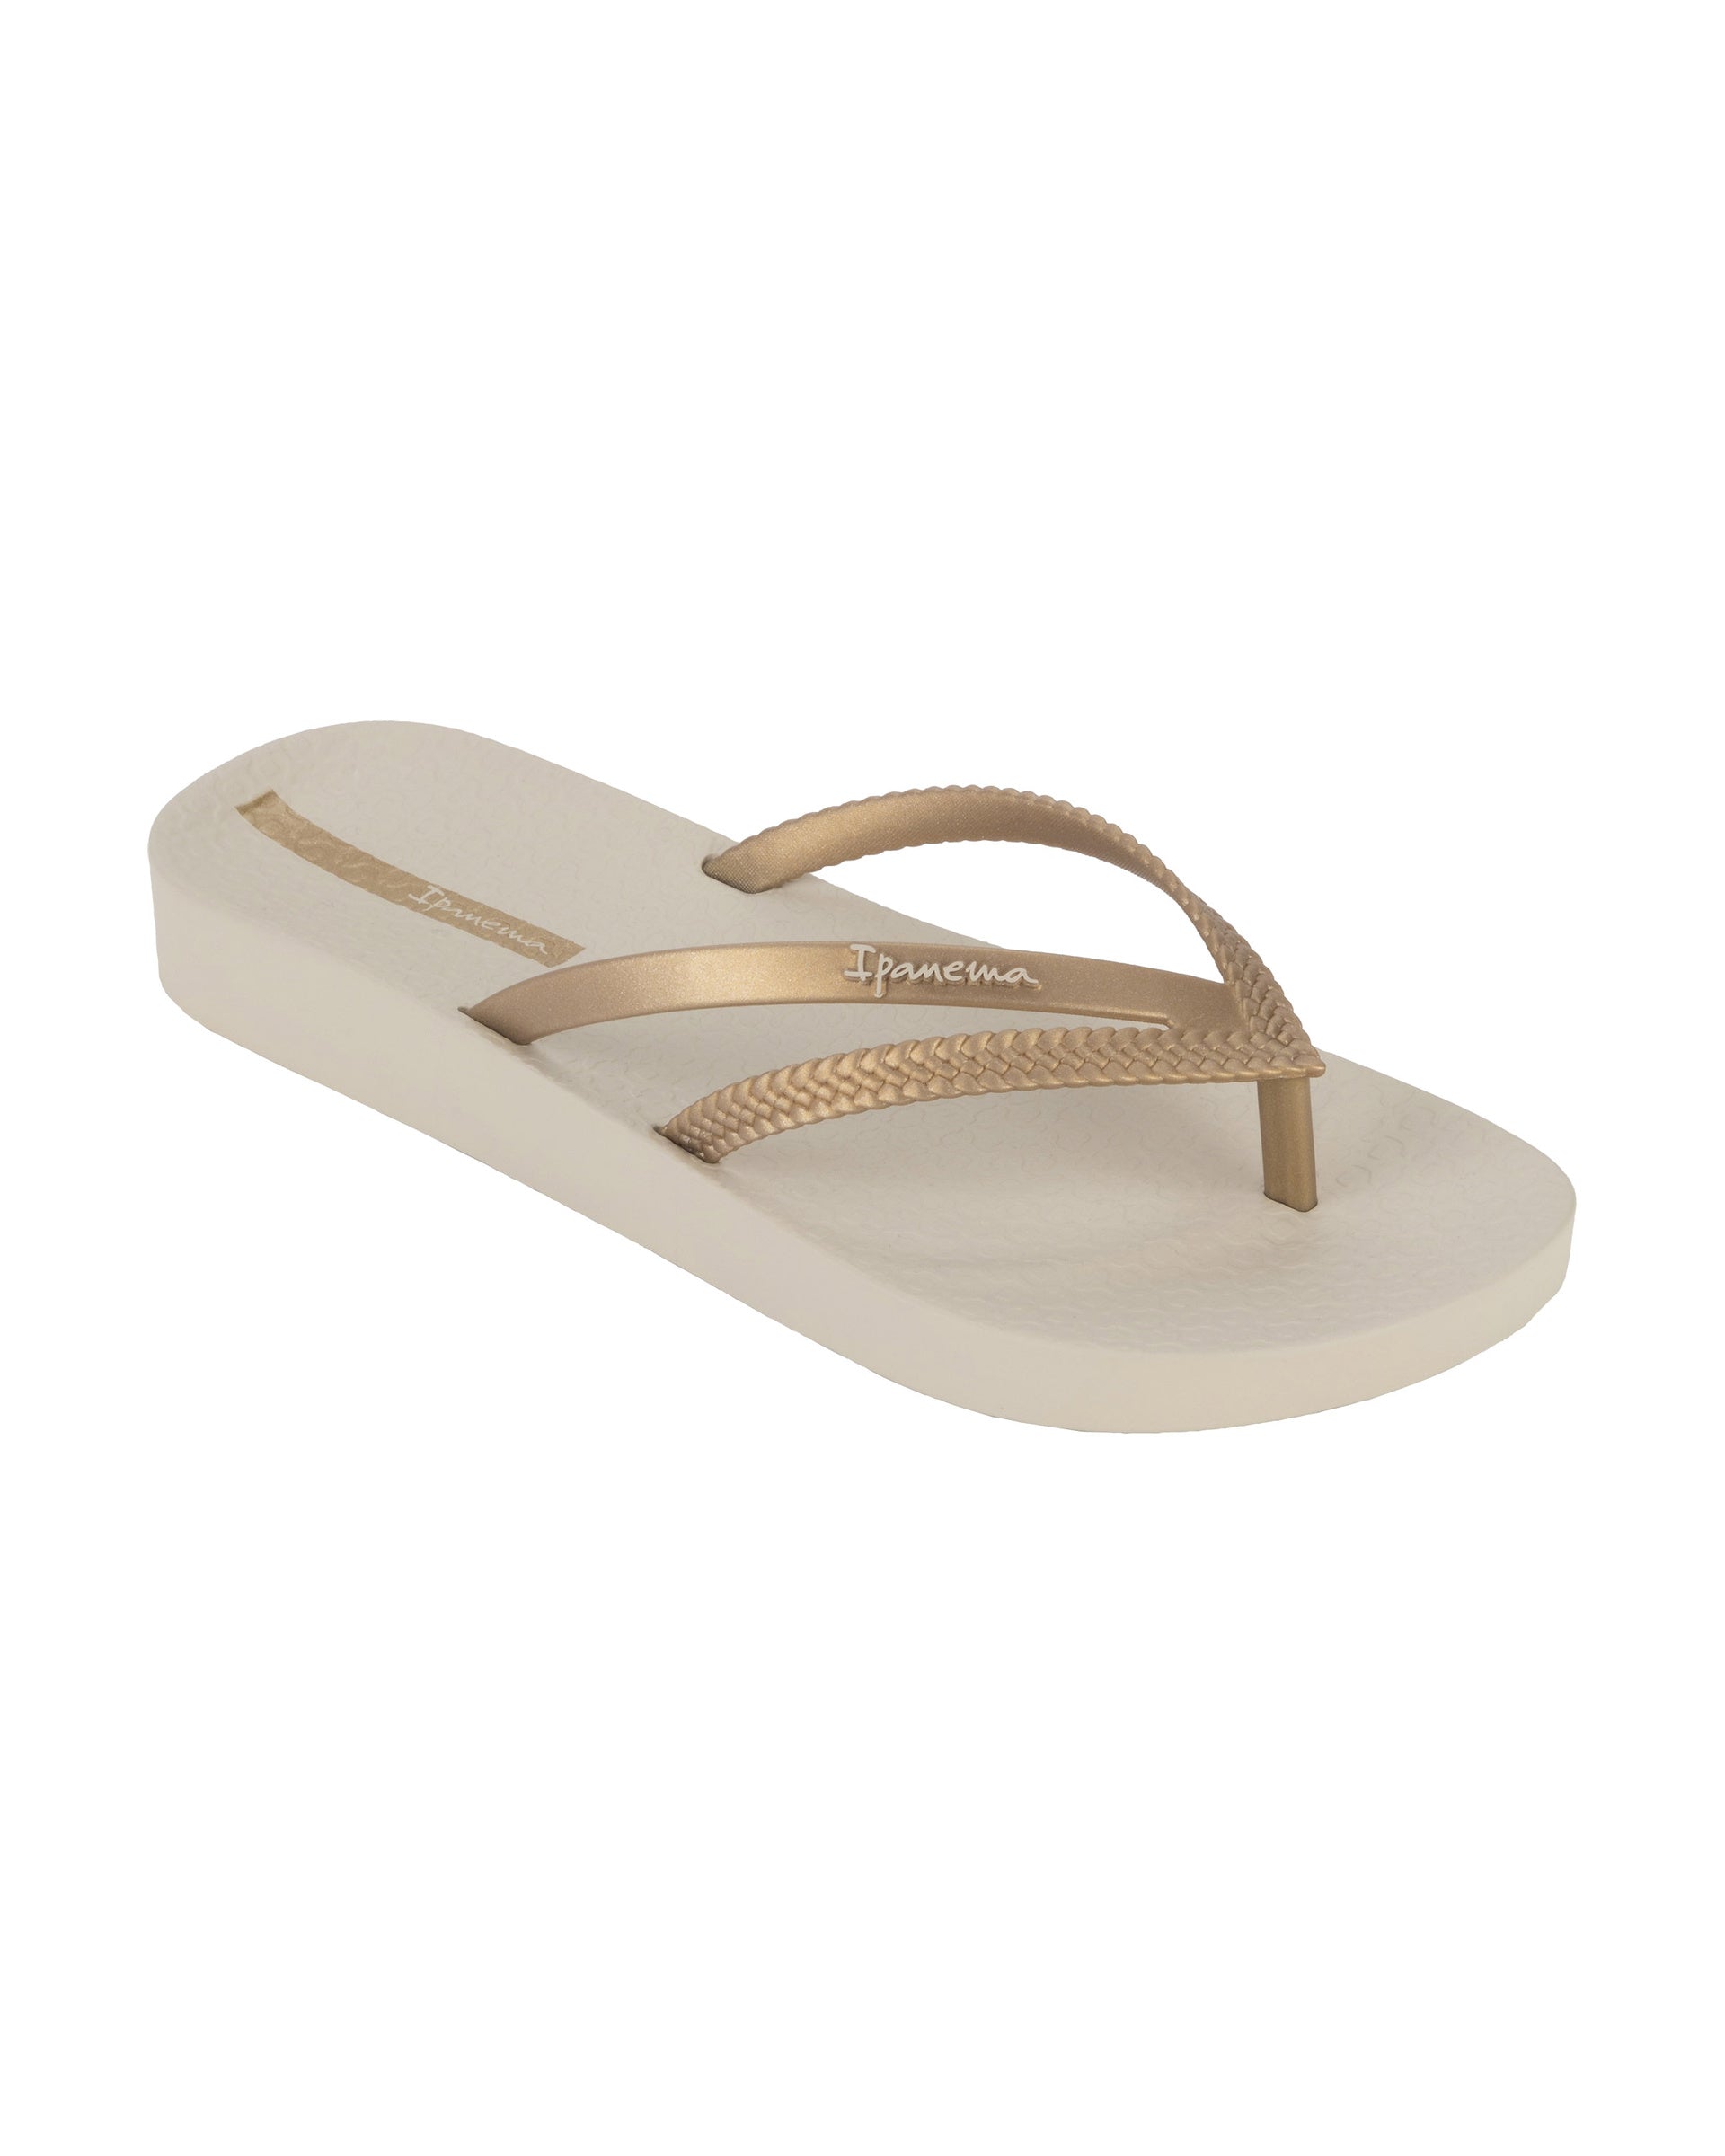 Angled view of a beige Ipanema Bossa Soft women's flip flop with gold straps.